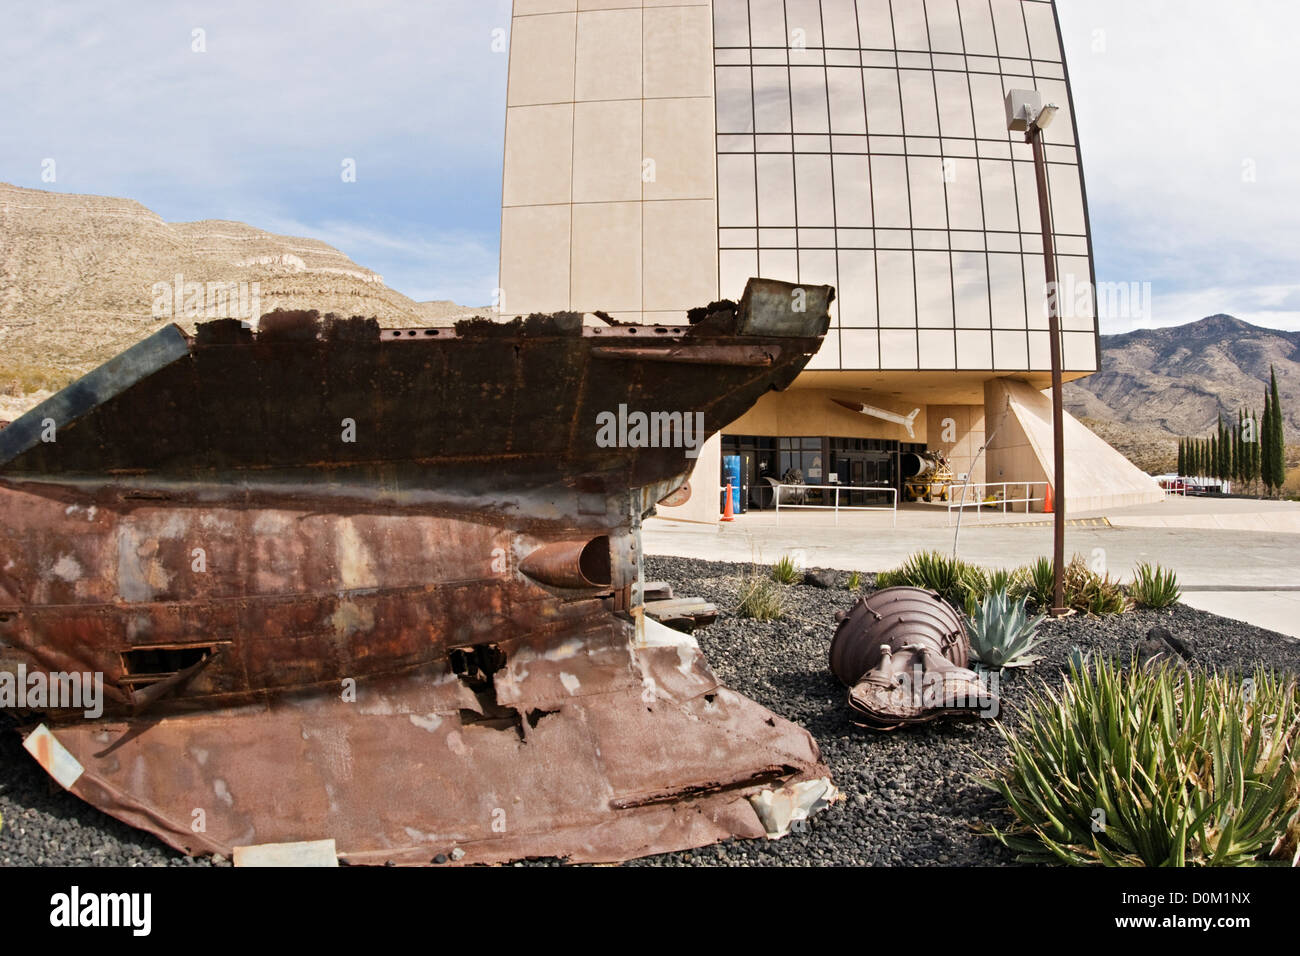 The wreckage of a rocket lies out in the John P. Stapp Air & Space Park outside the New Mexico Museum of Space History. Stock Photo